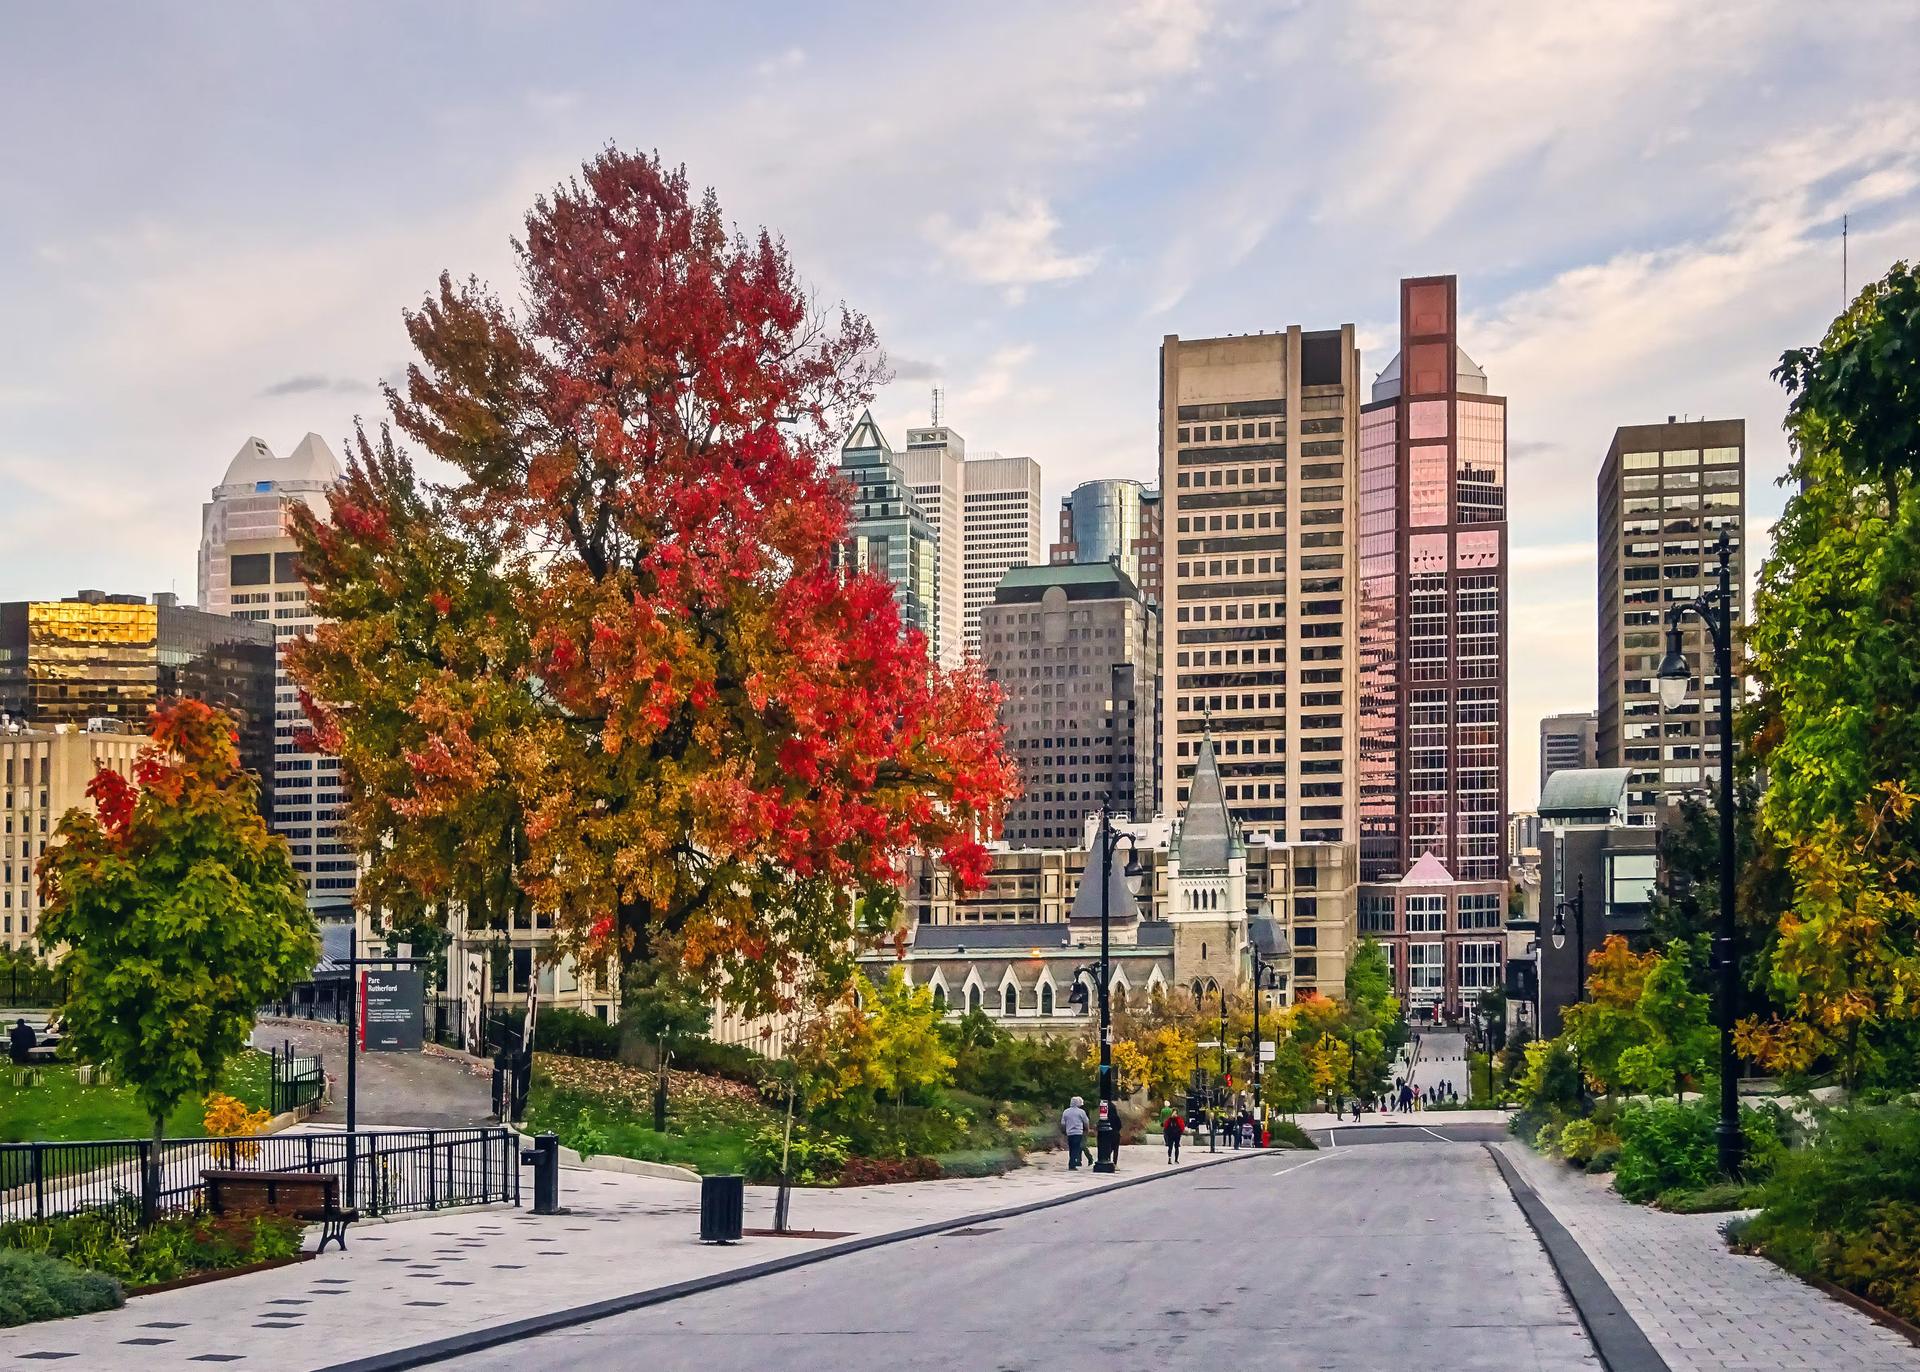 A large tree with red leaves is visible next to a road in Montreal. A skyline filled with buildings is in shot, along with some smaller trees